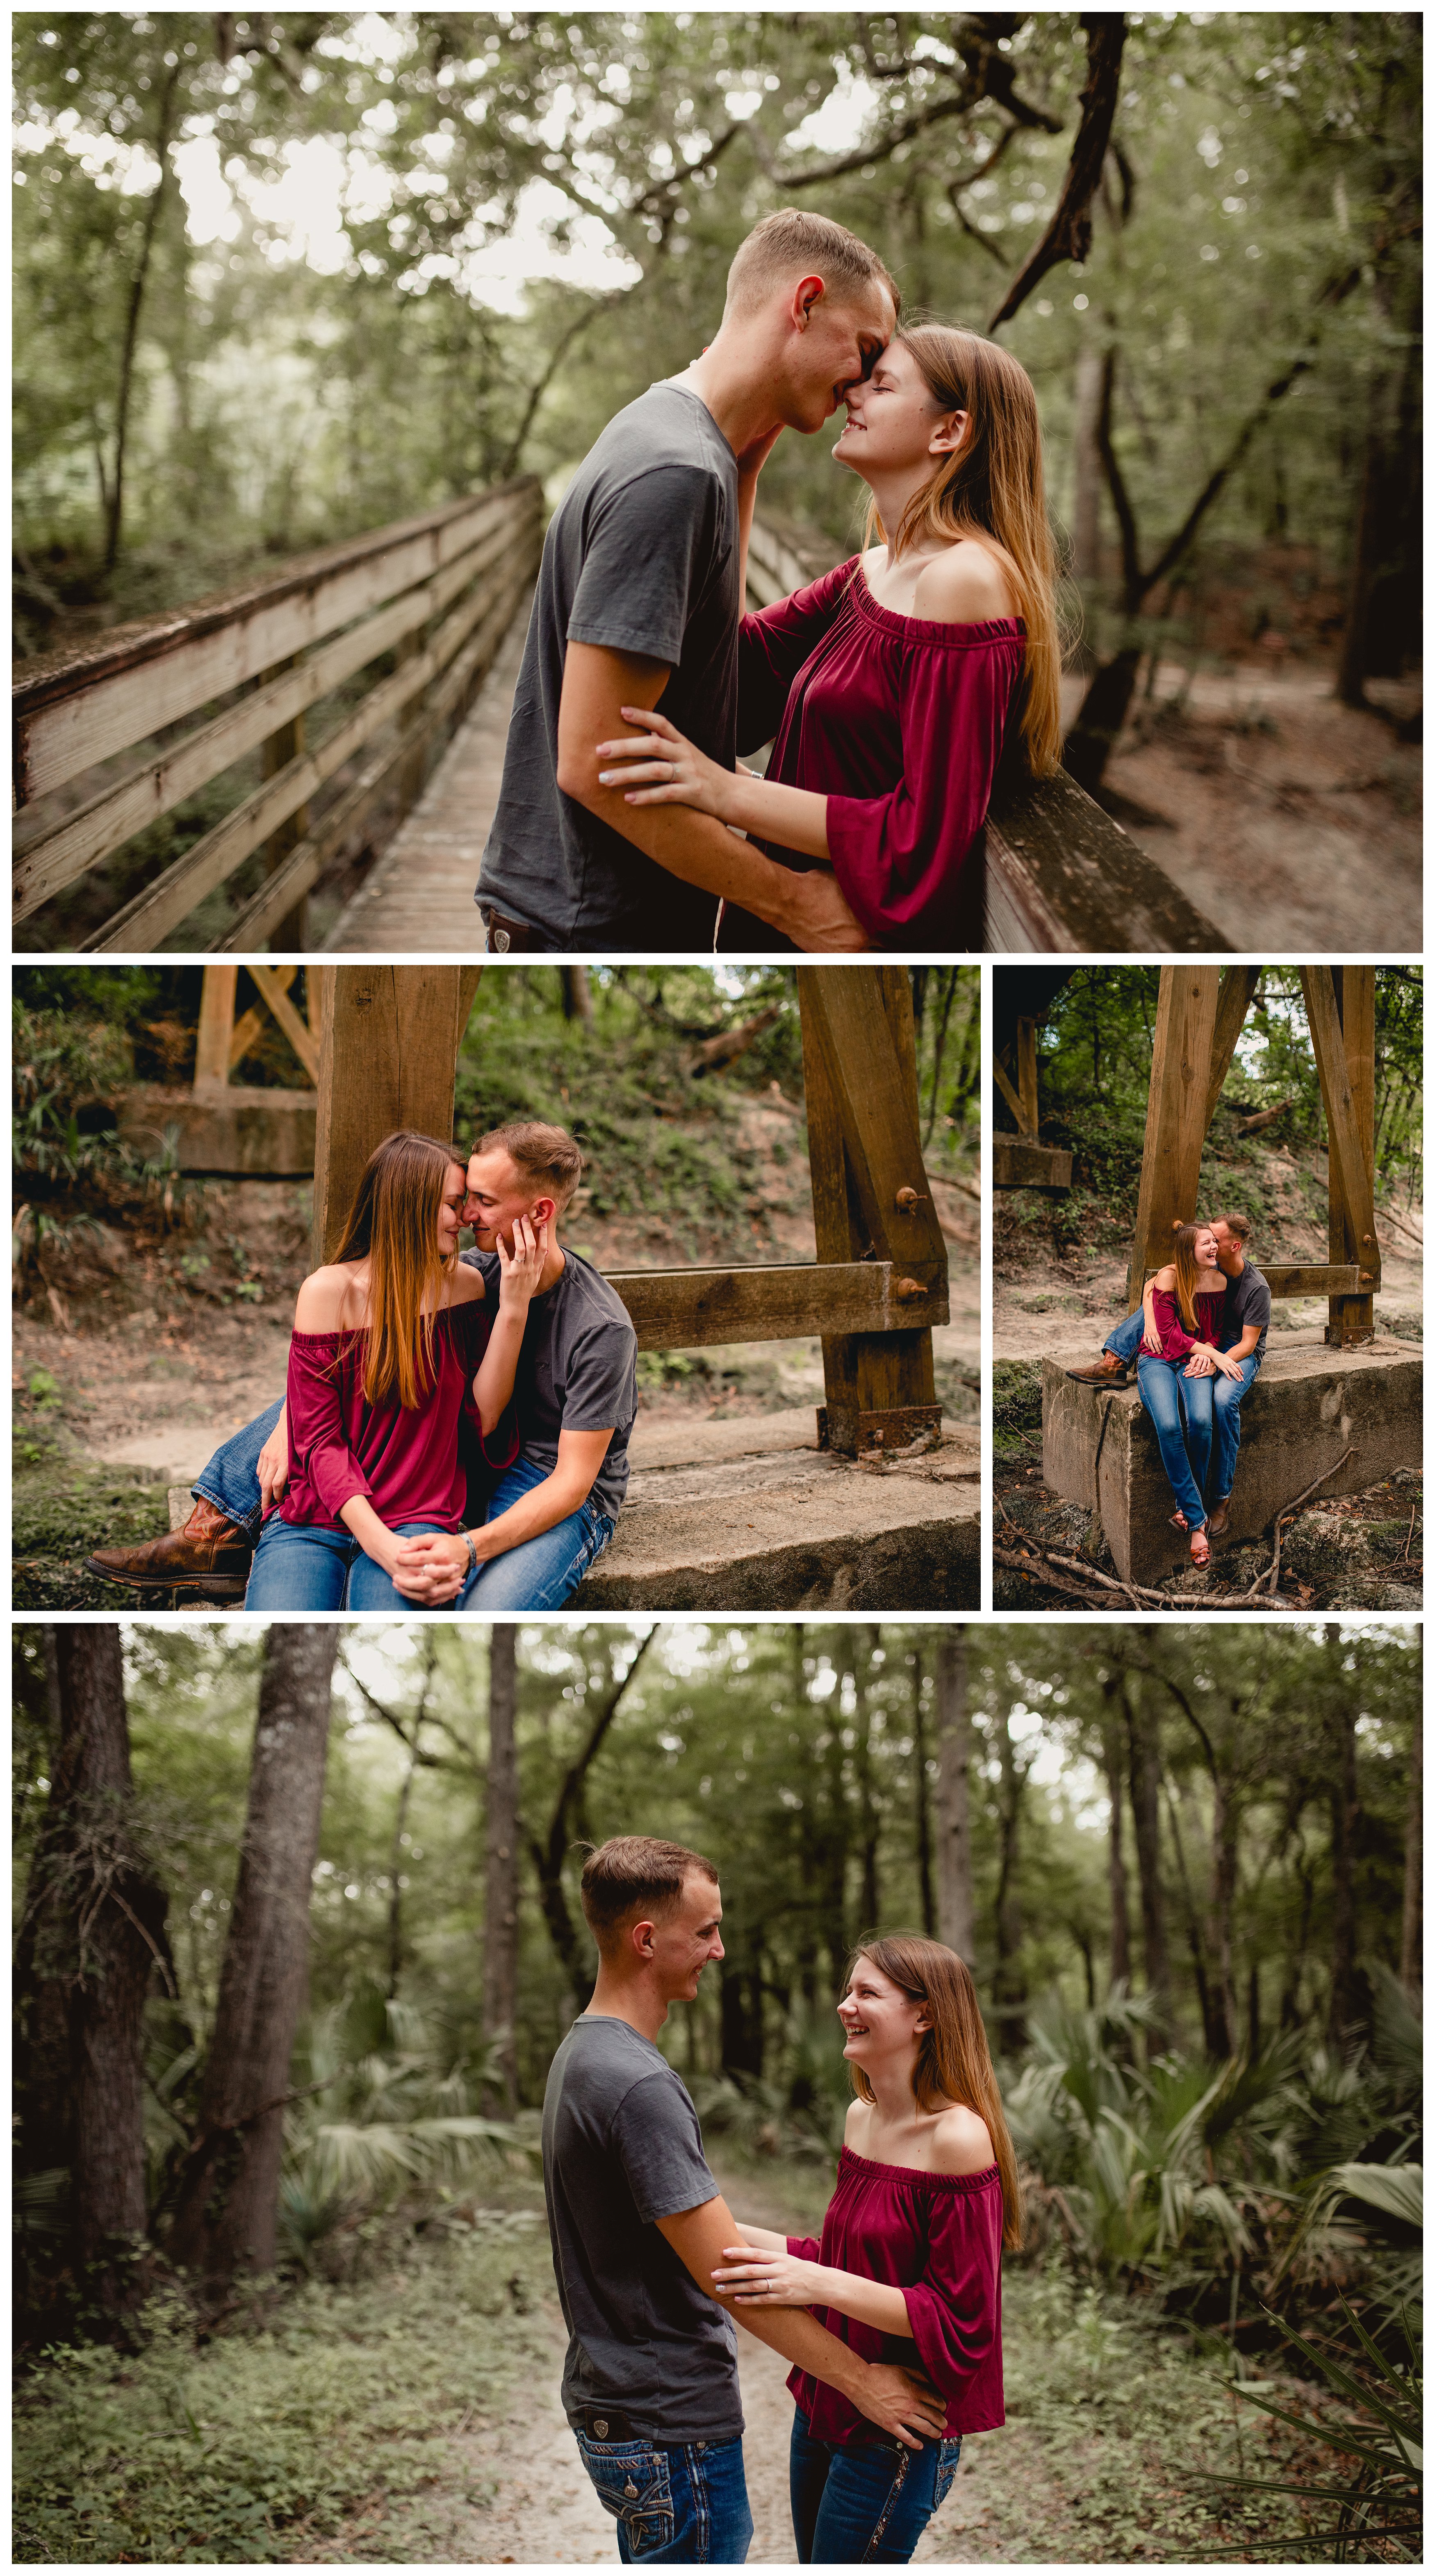 Engagement pictures taken in the woods in Florida with a lot of greens.